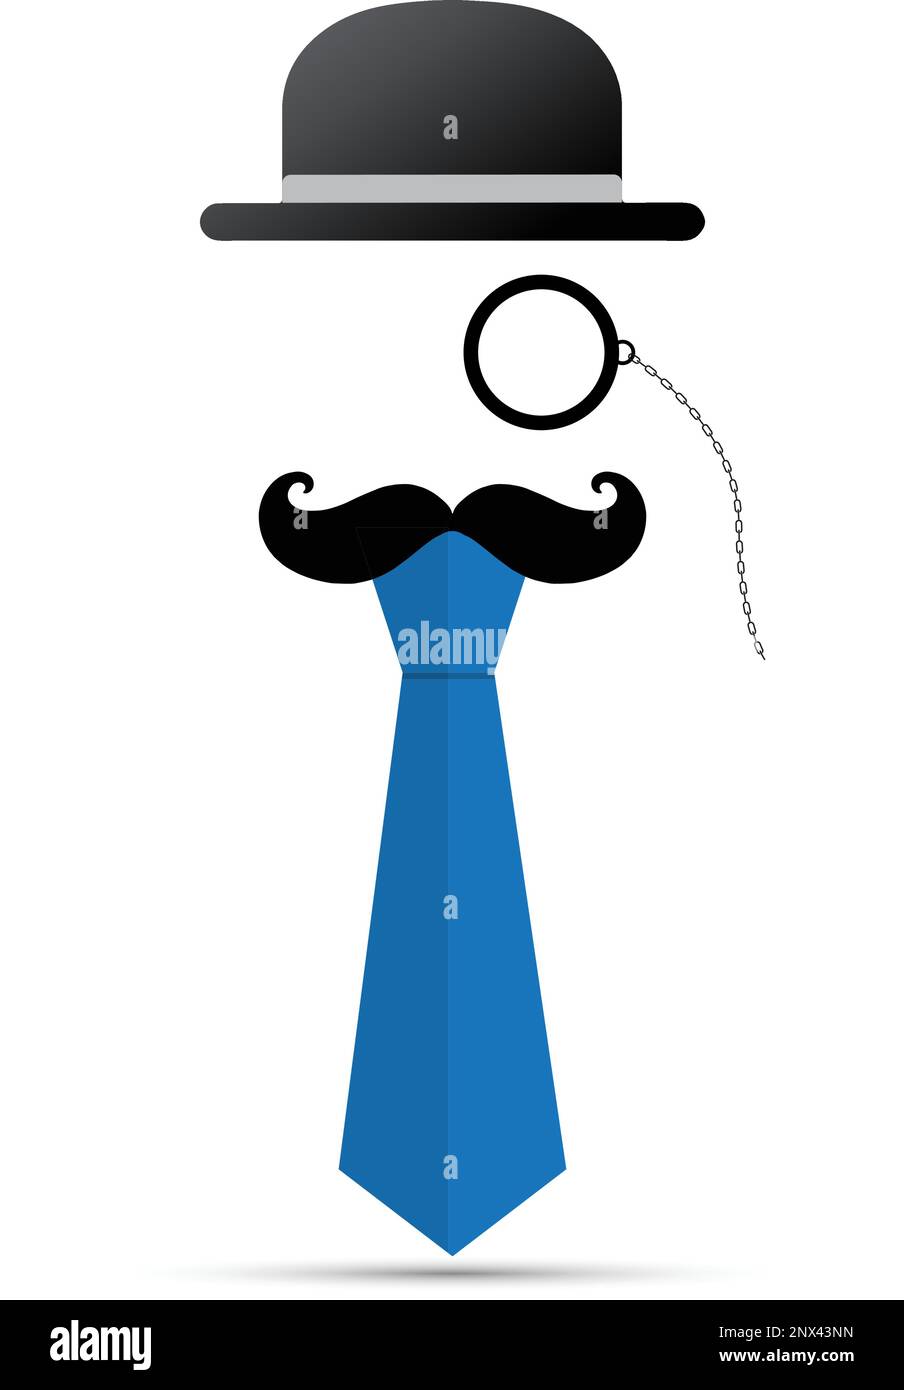 Black mustache, monocle, hat and blue tie on white background Stock Vector